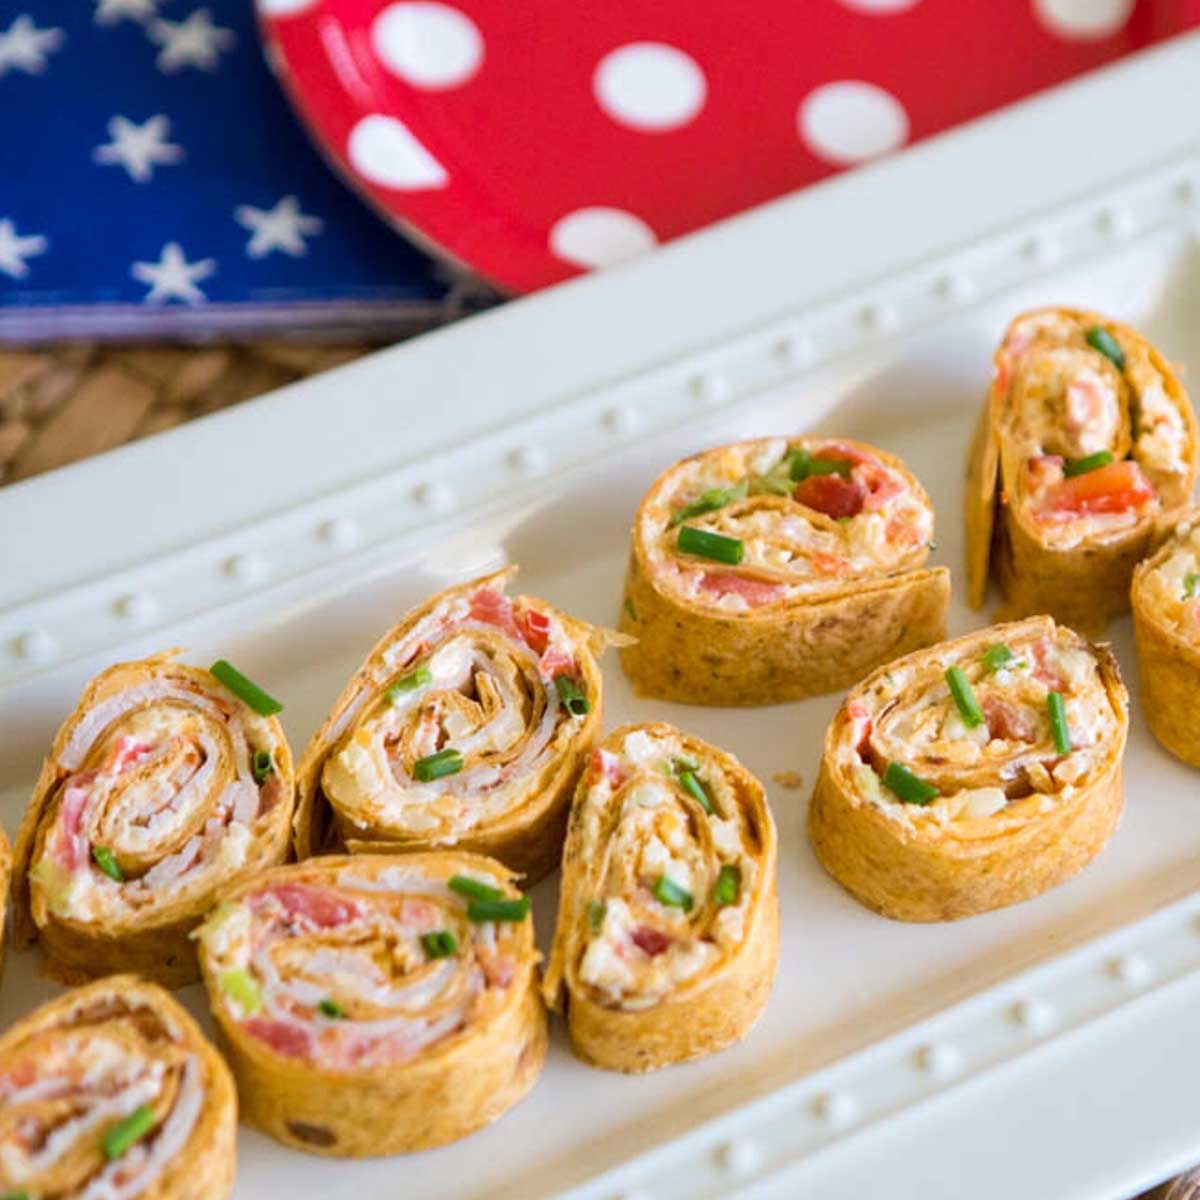 A platter of spicy firecracker pinwheels appetizers shows the meat and veggies rolled up in the tortilla.